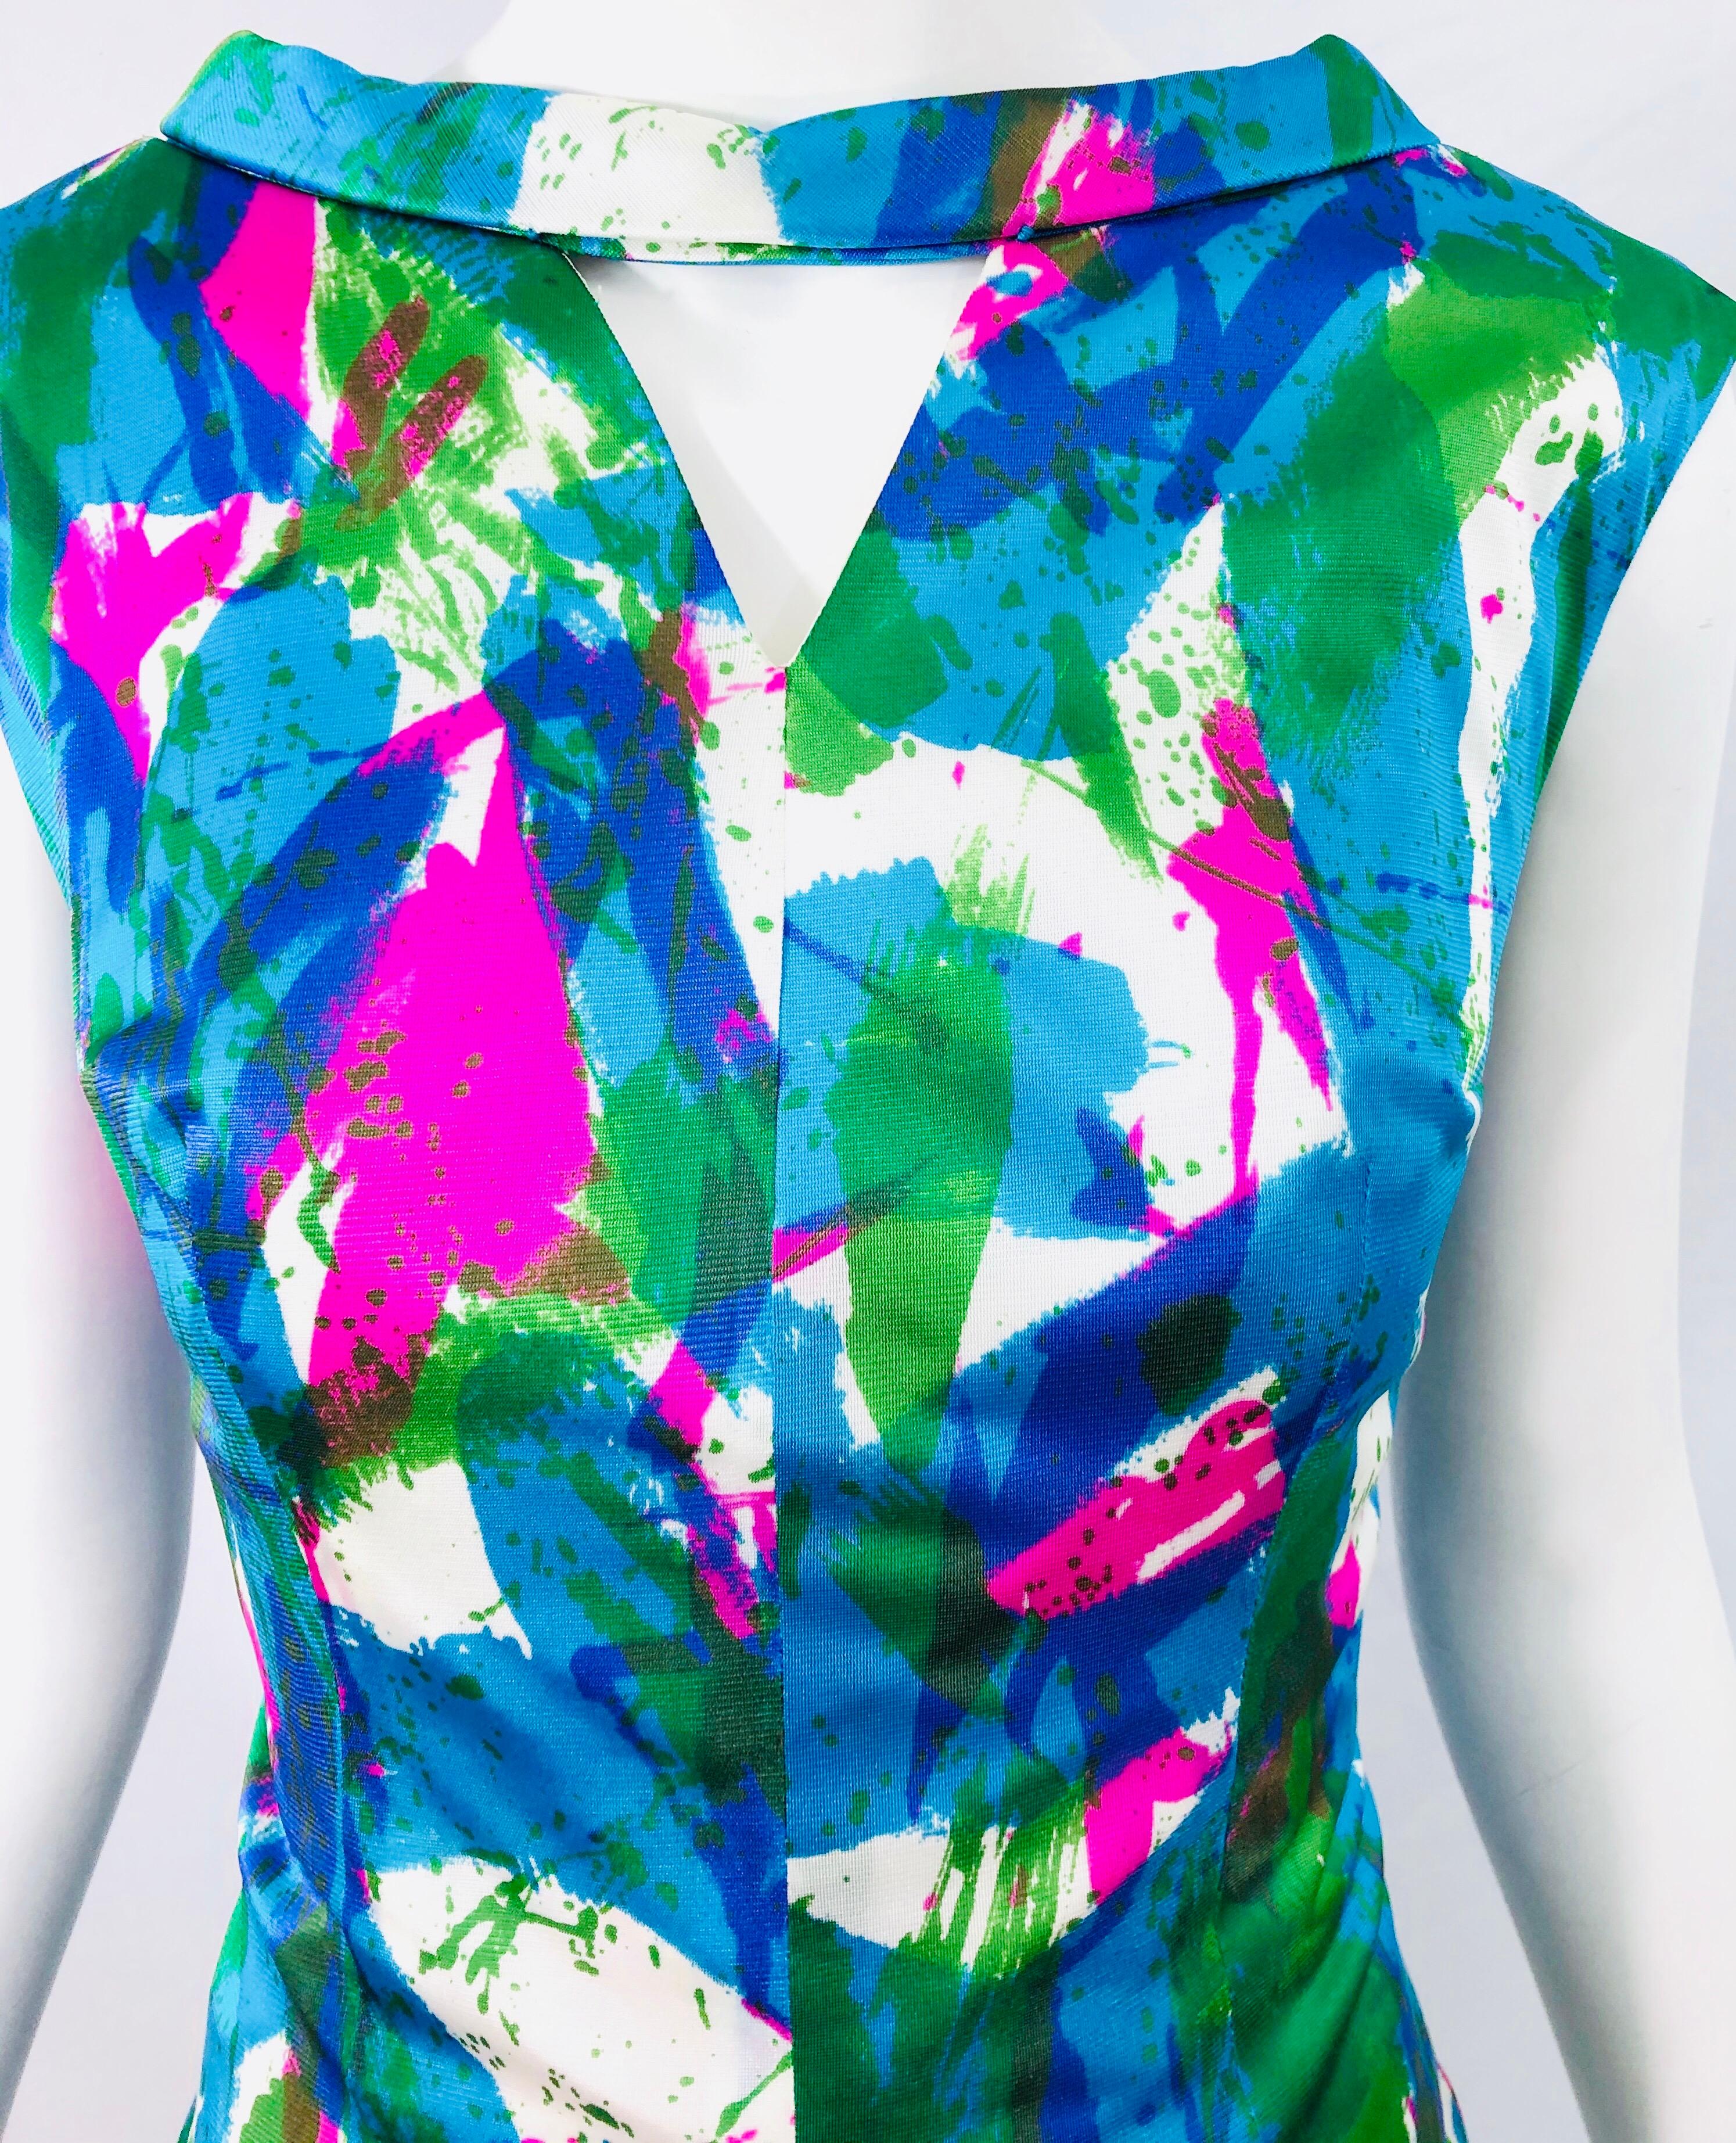 Chic 1960s Neon Abstract Print Two Piece Vintage 60s Sheath Dress + Top Blouse  In Excellent Condition For Sale In San Diego, CA